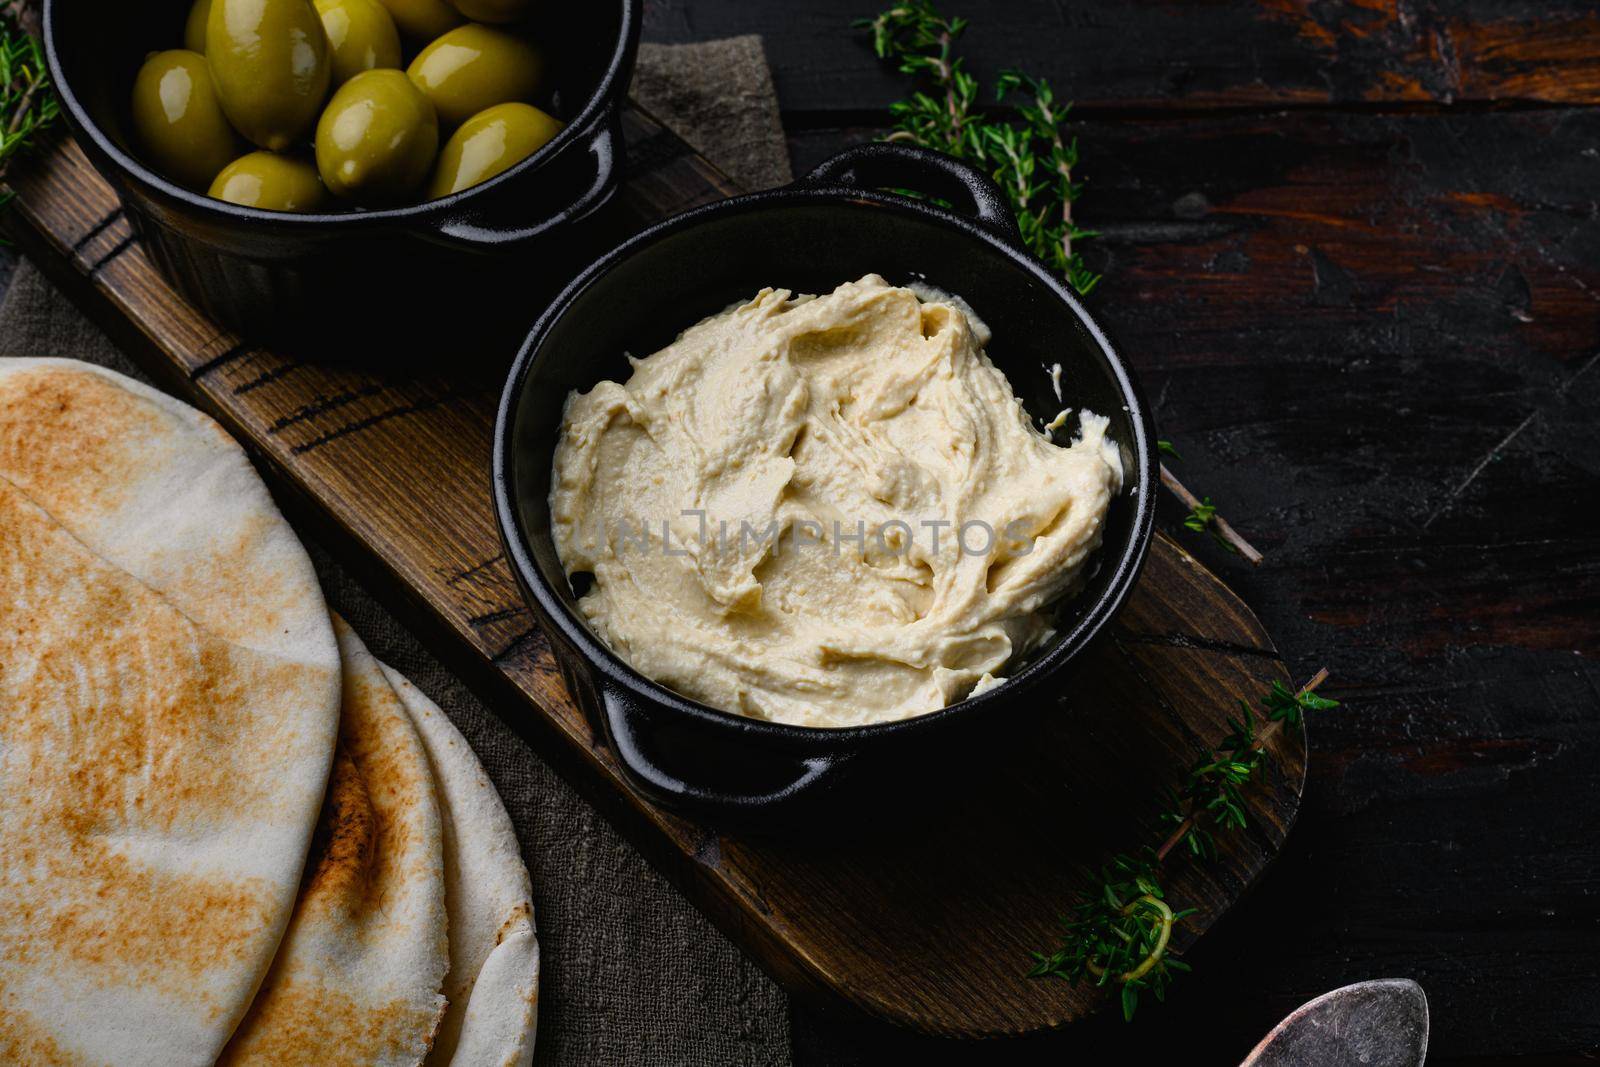 Hummus and wheat flatbread set, on old dark wooden table background, with copy space for text by Ilianesolenyi